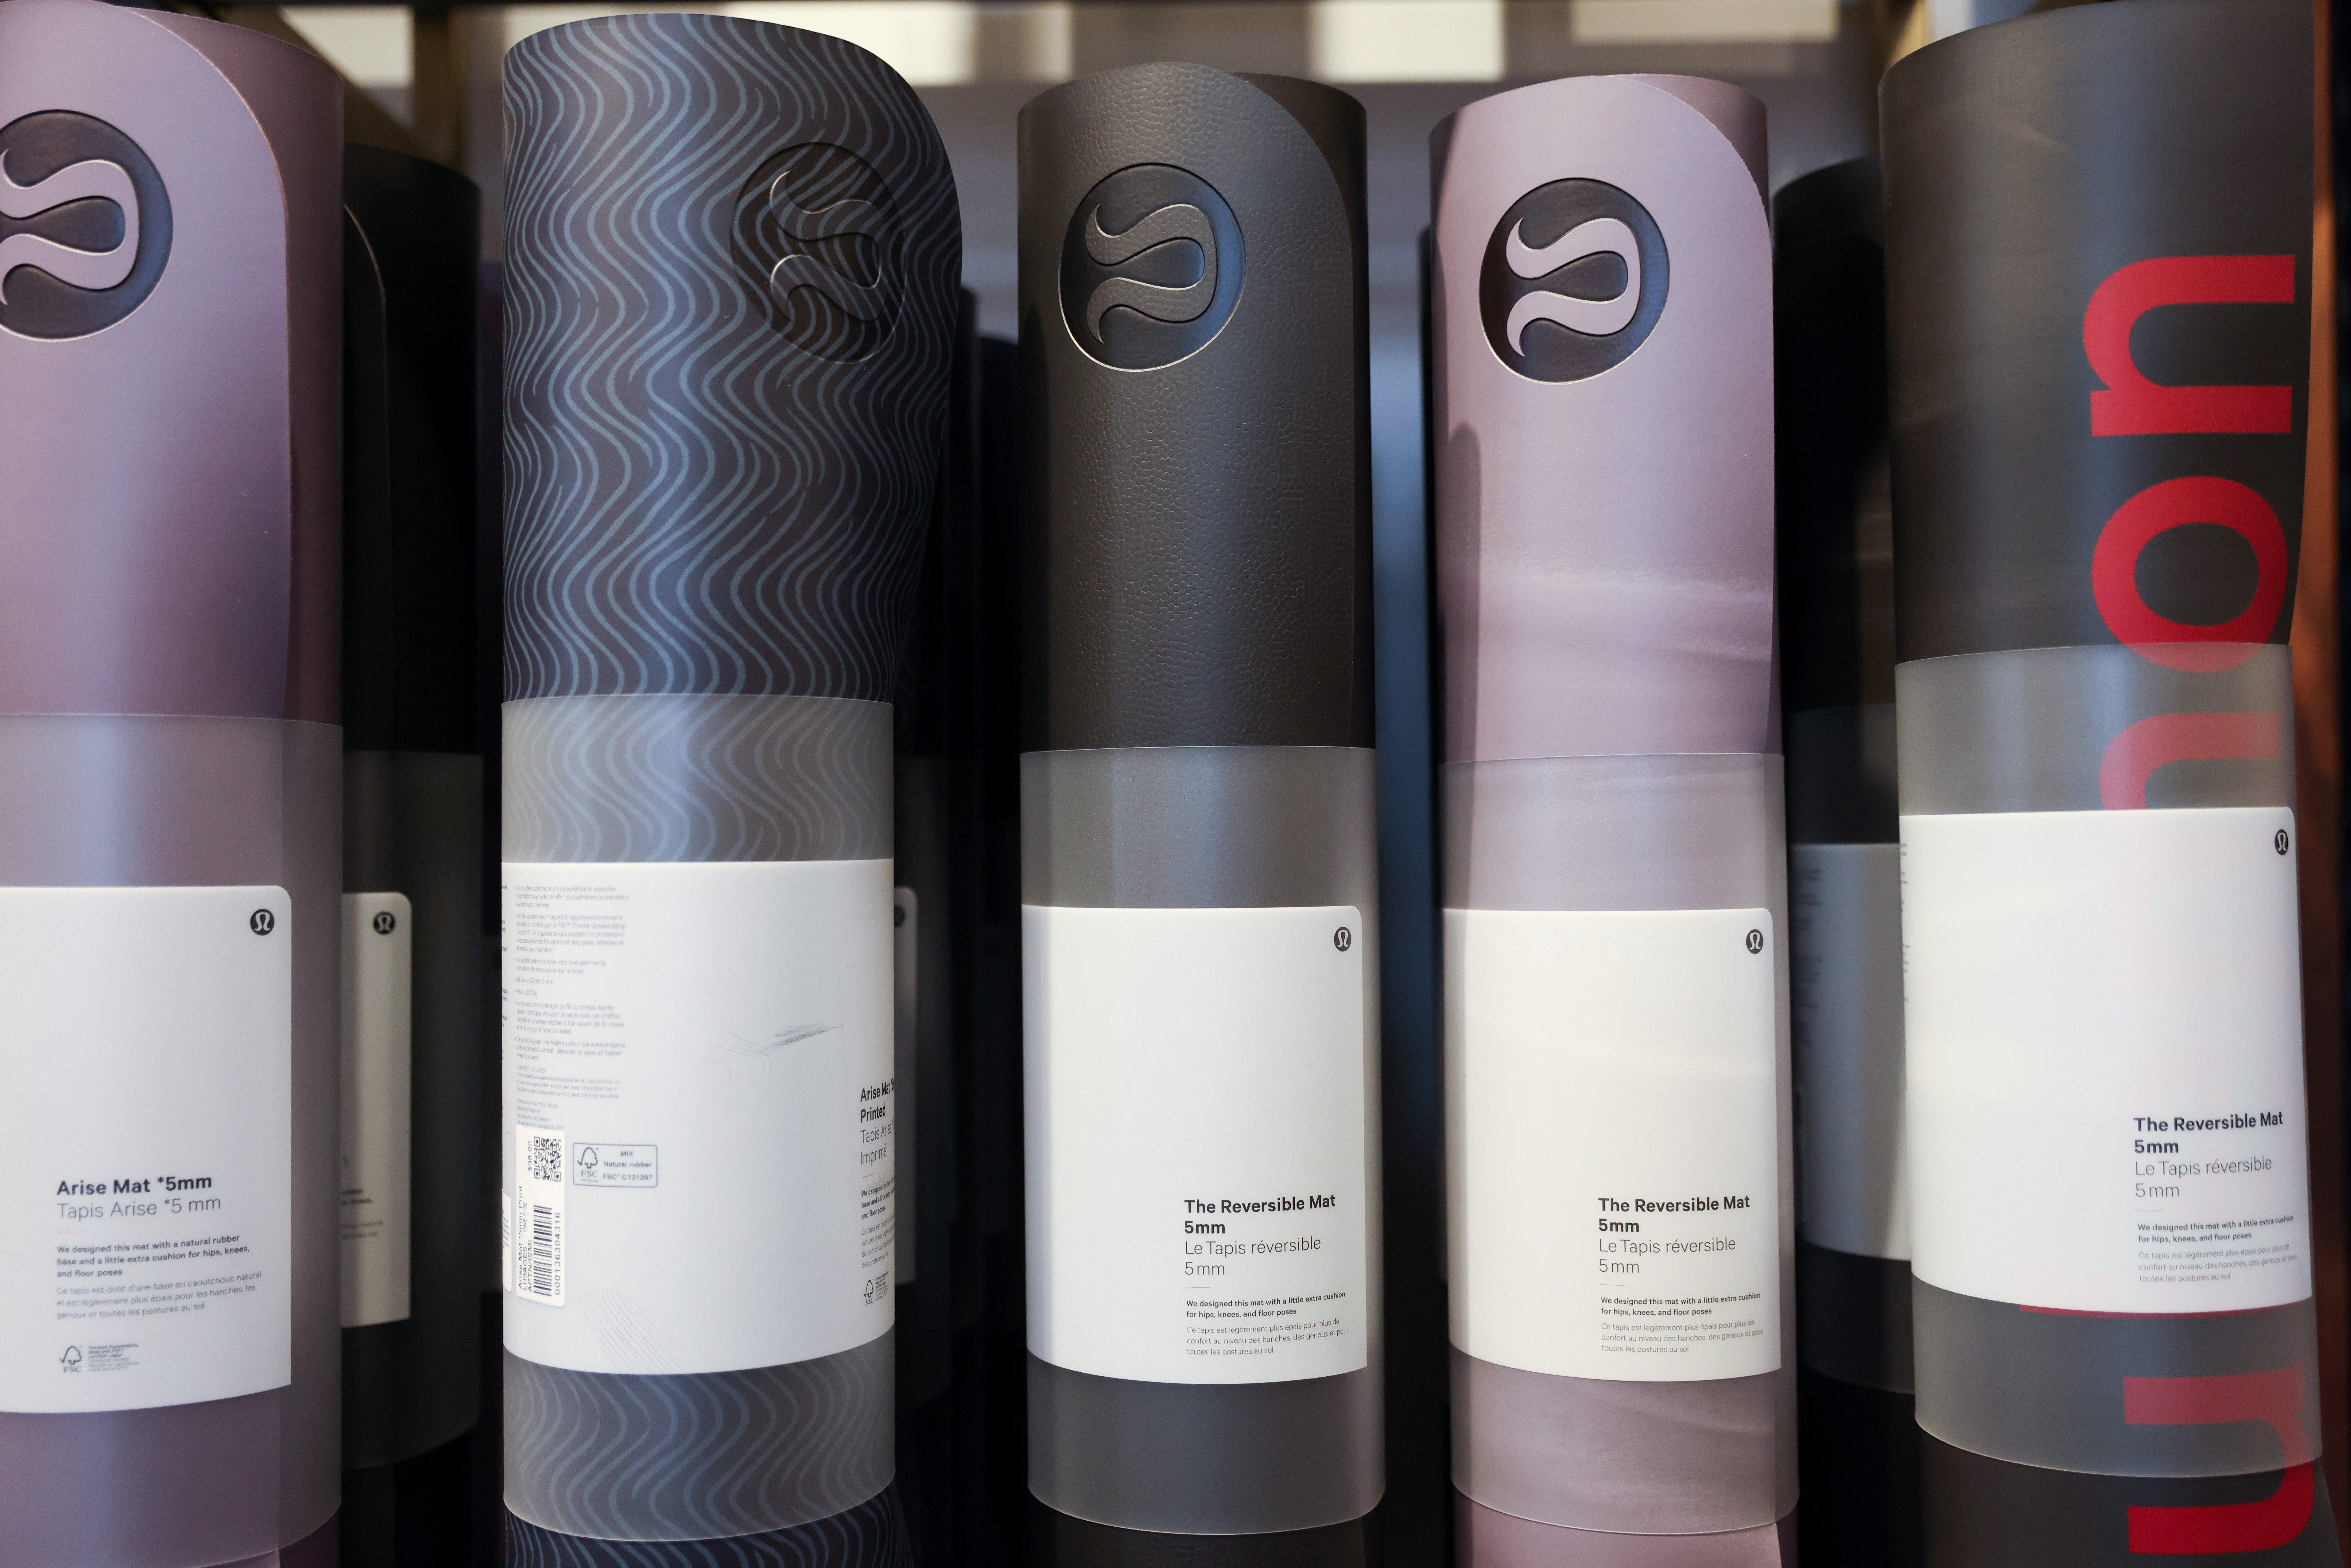 Yoga mats are seen on display in a Lululemon Athletica store in Manhattan, New York